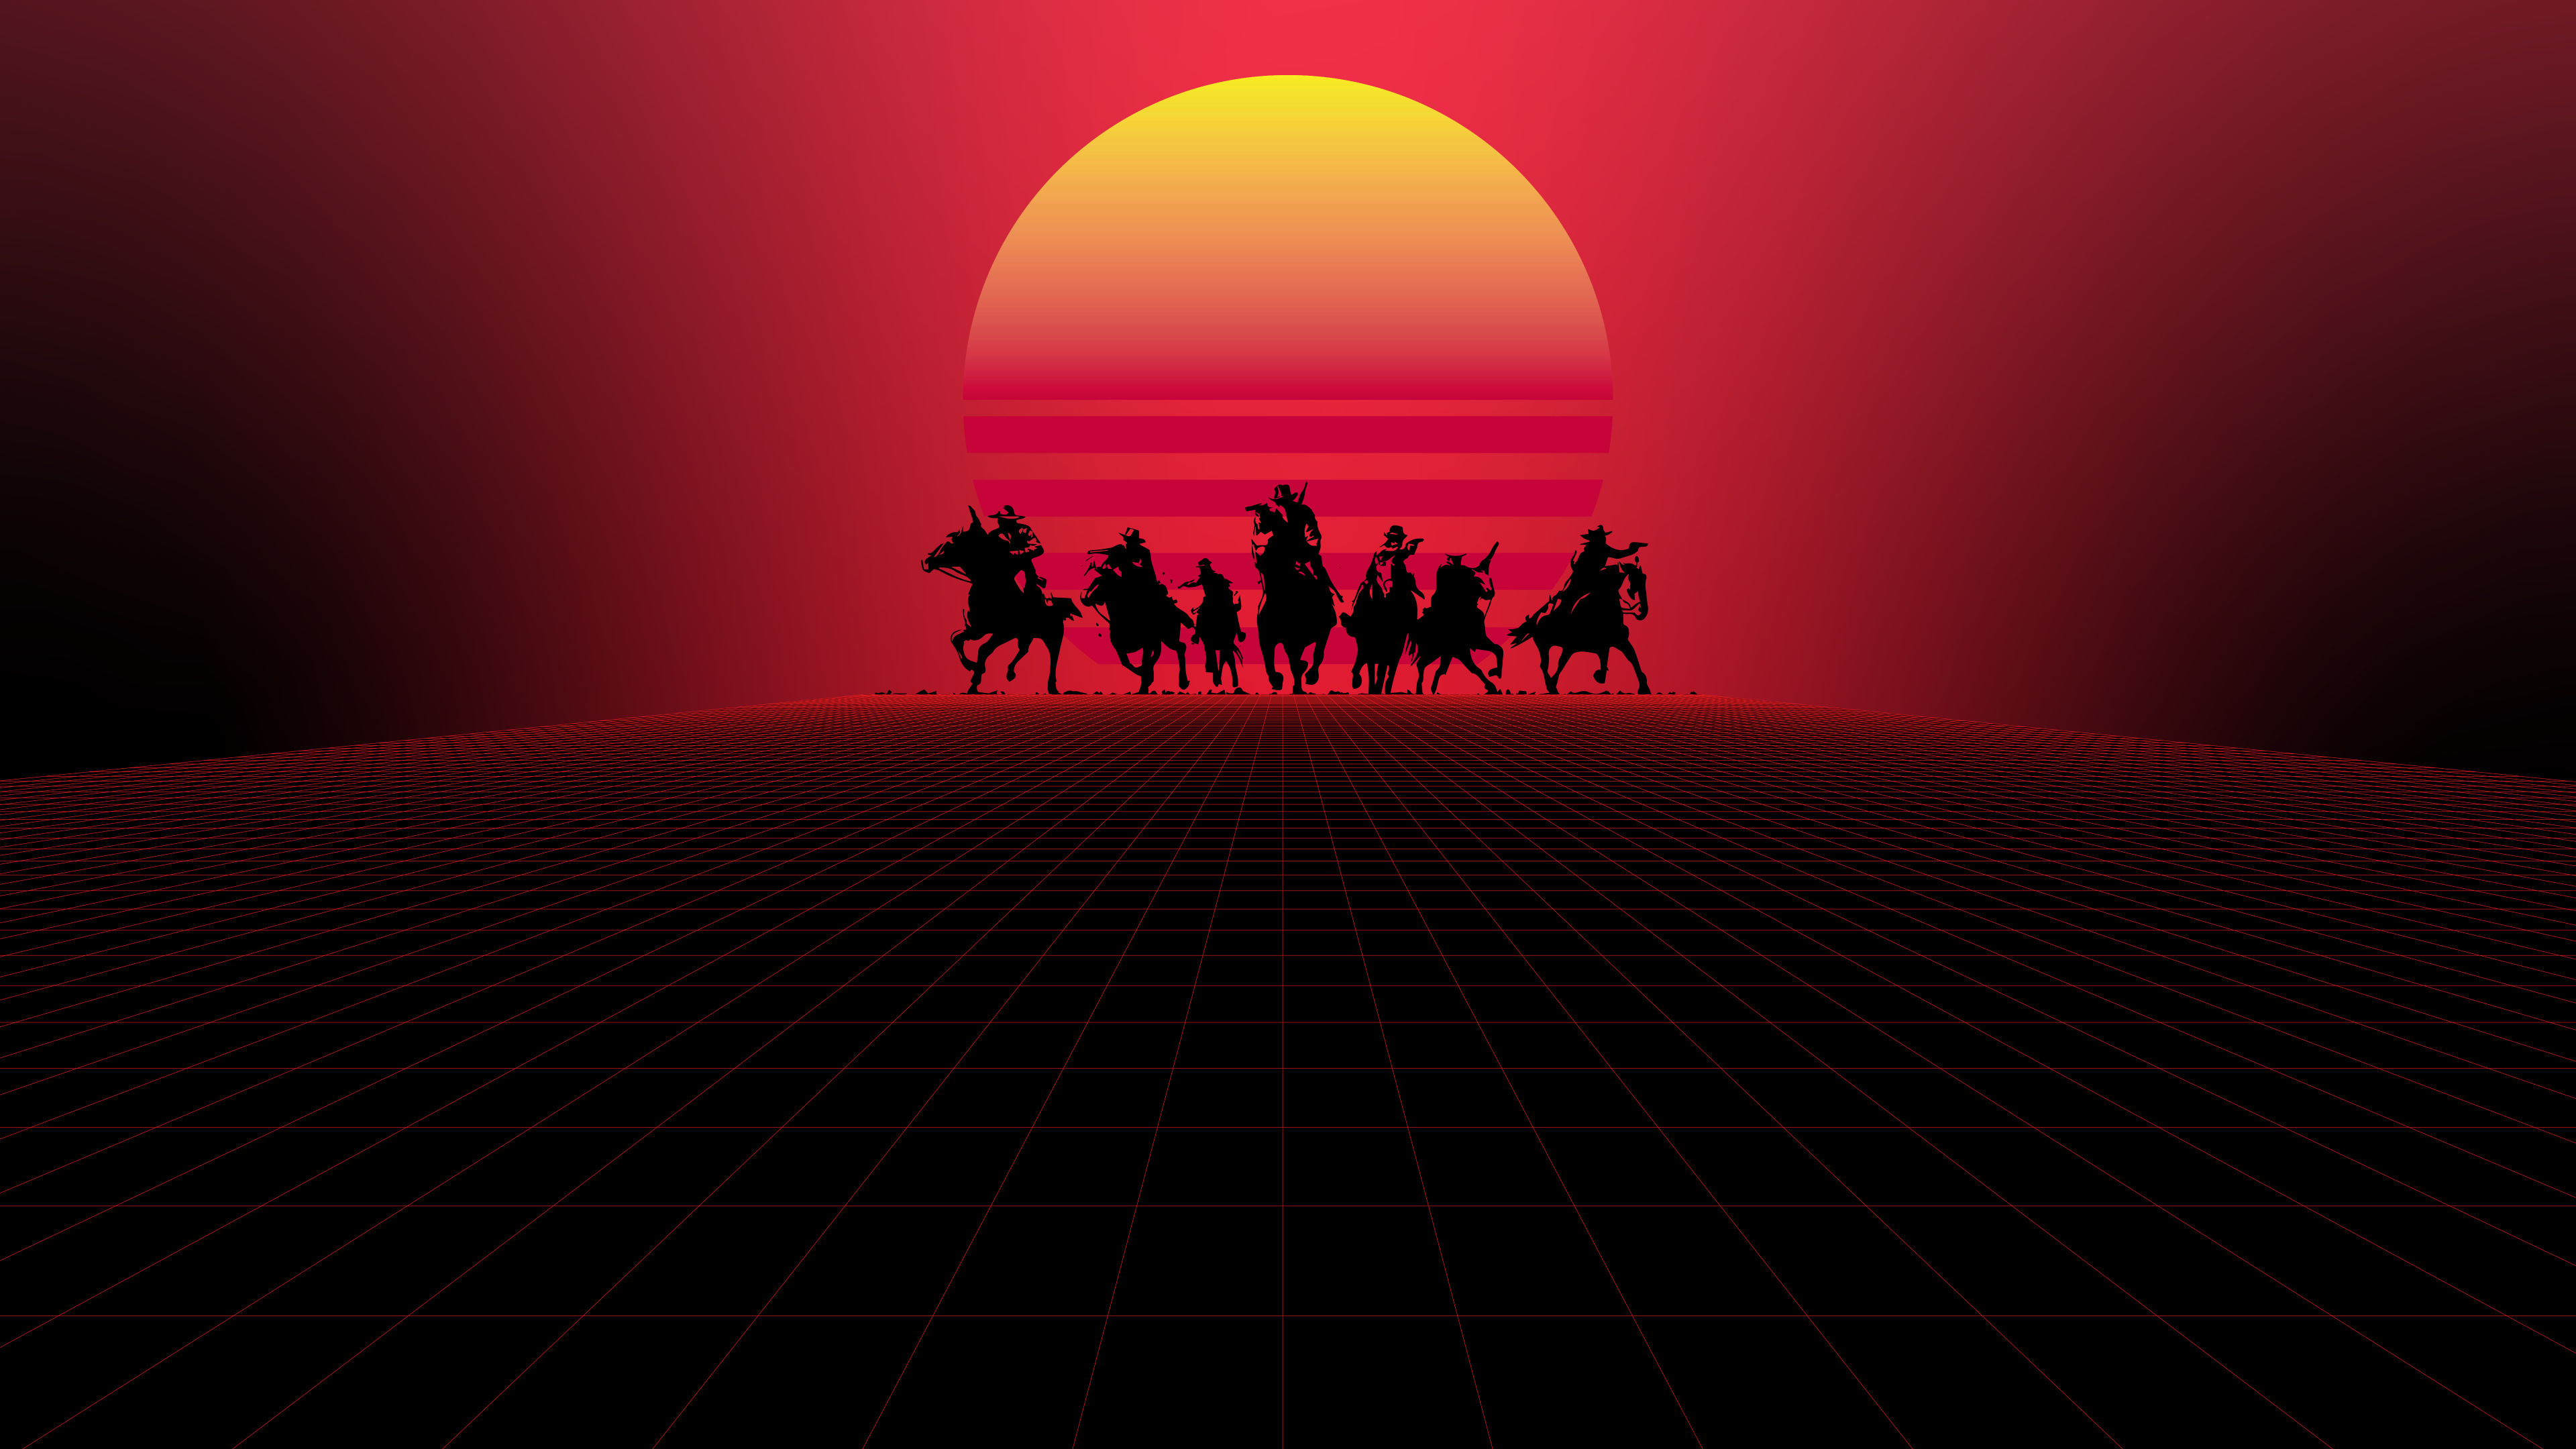 Red Dead Redemption, Red Dead Redemption 2, Red, Silhouette, Pack Animal. Wallpaper in 3840x2160 Resolution